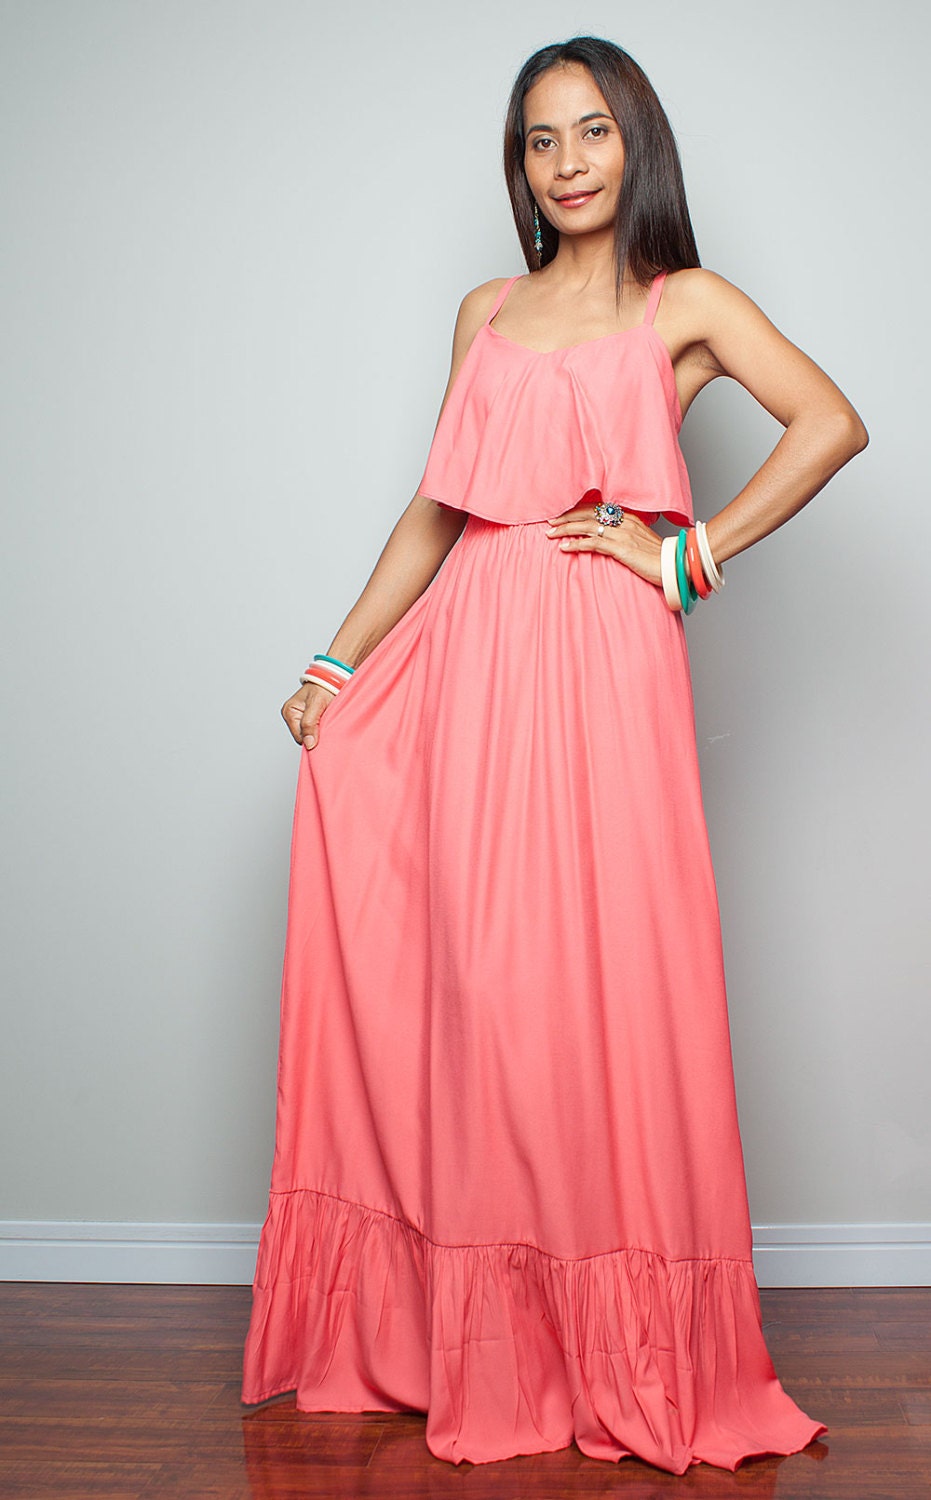 Evening Dress - Coral Cocktail Dress: Sunny Dreams Collection II!